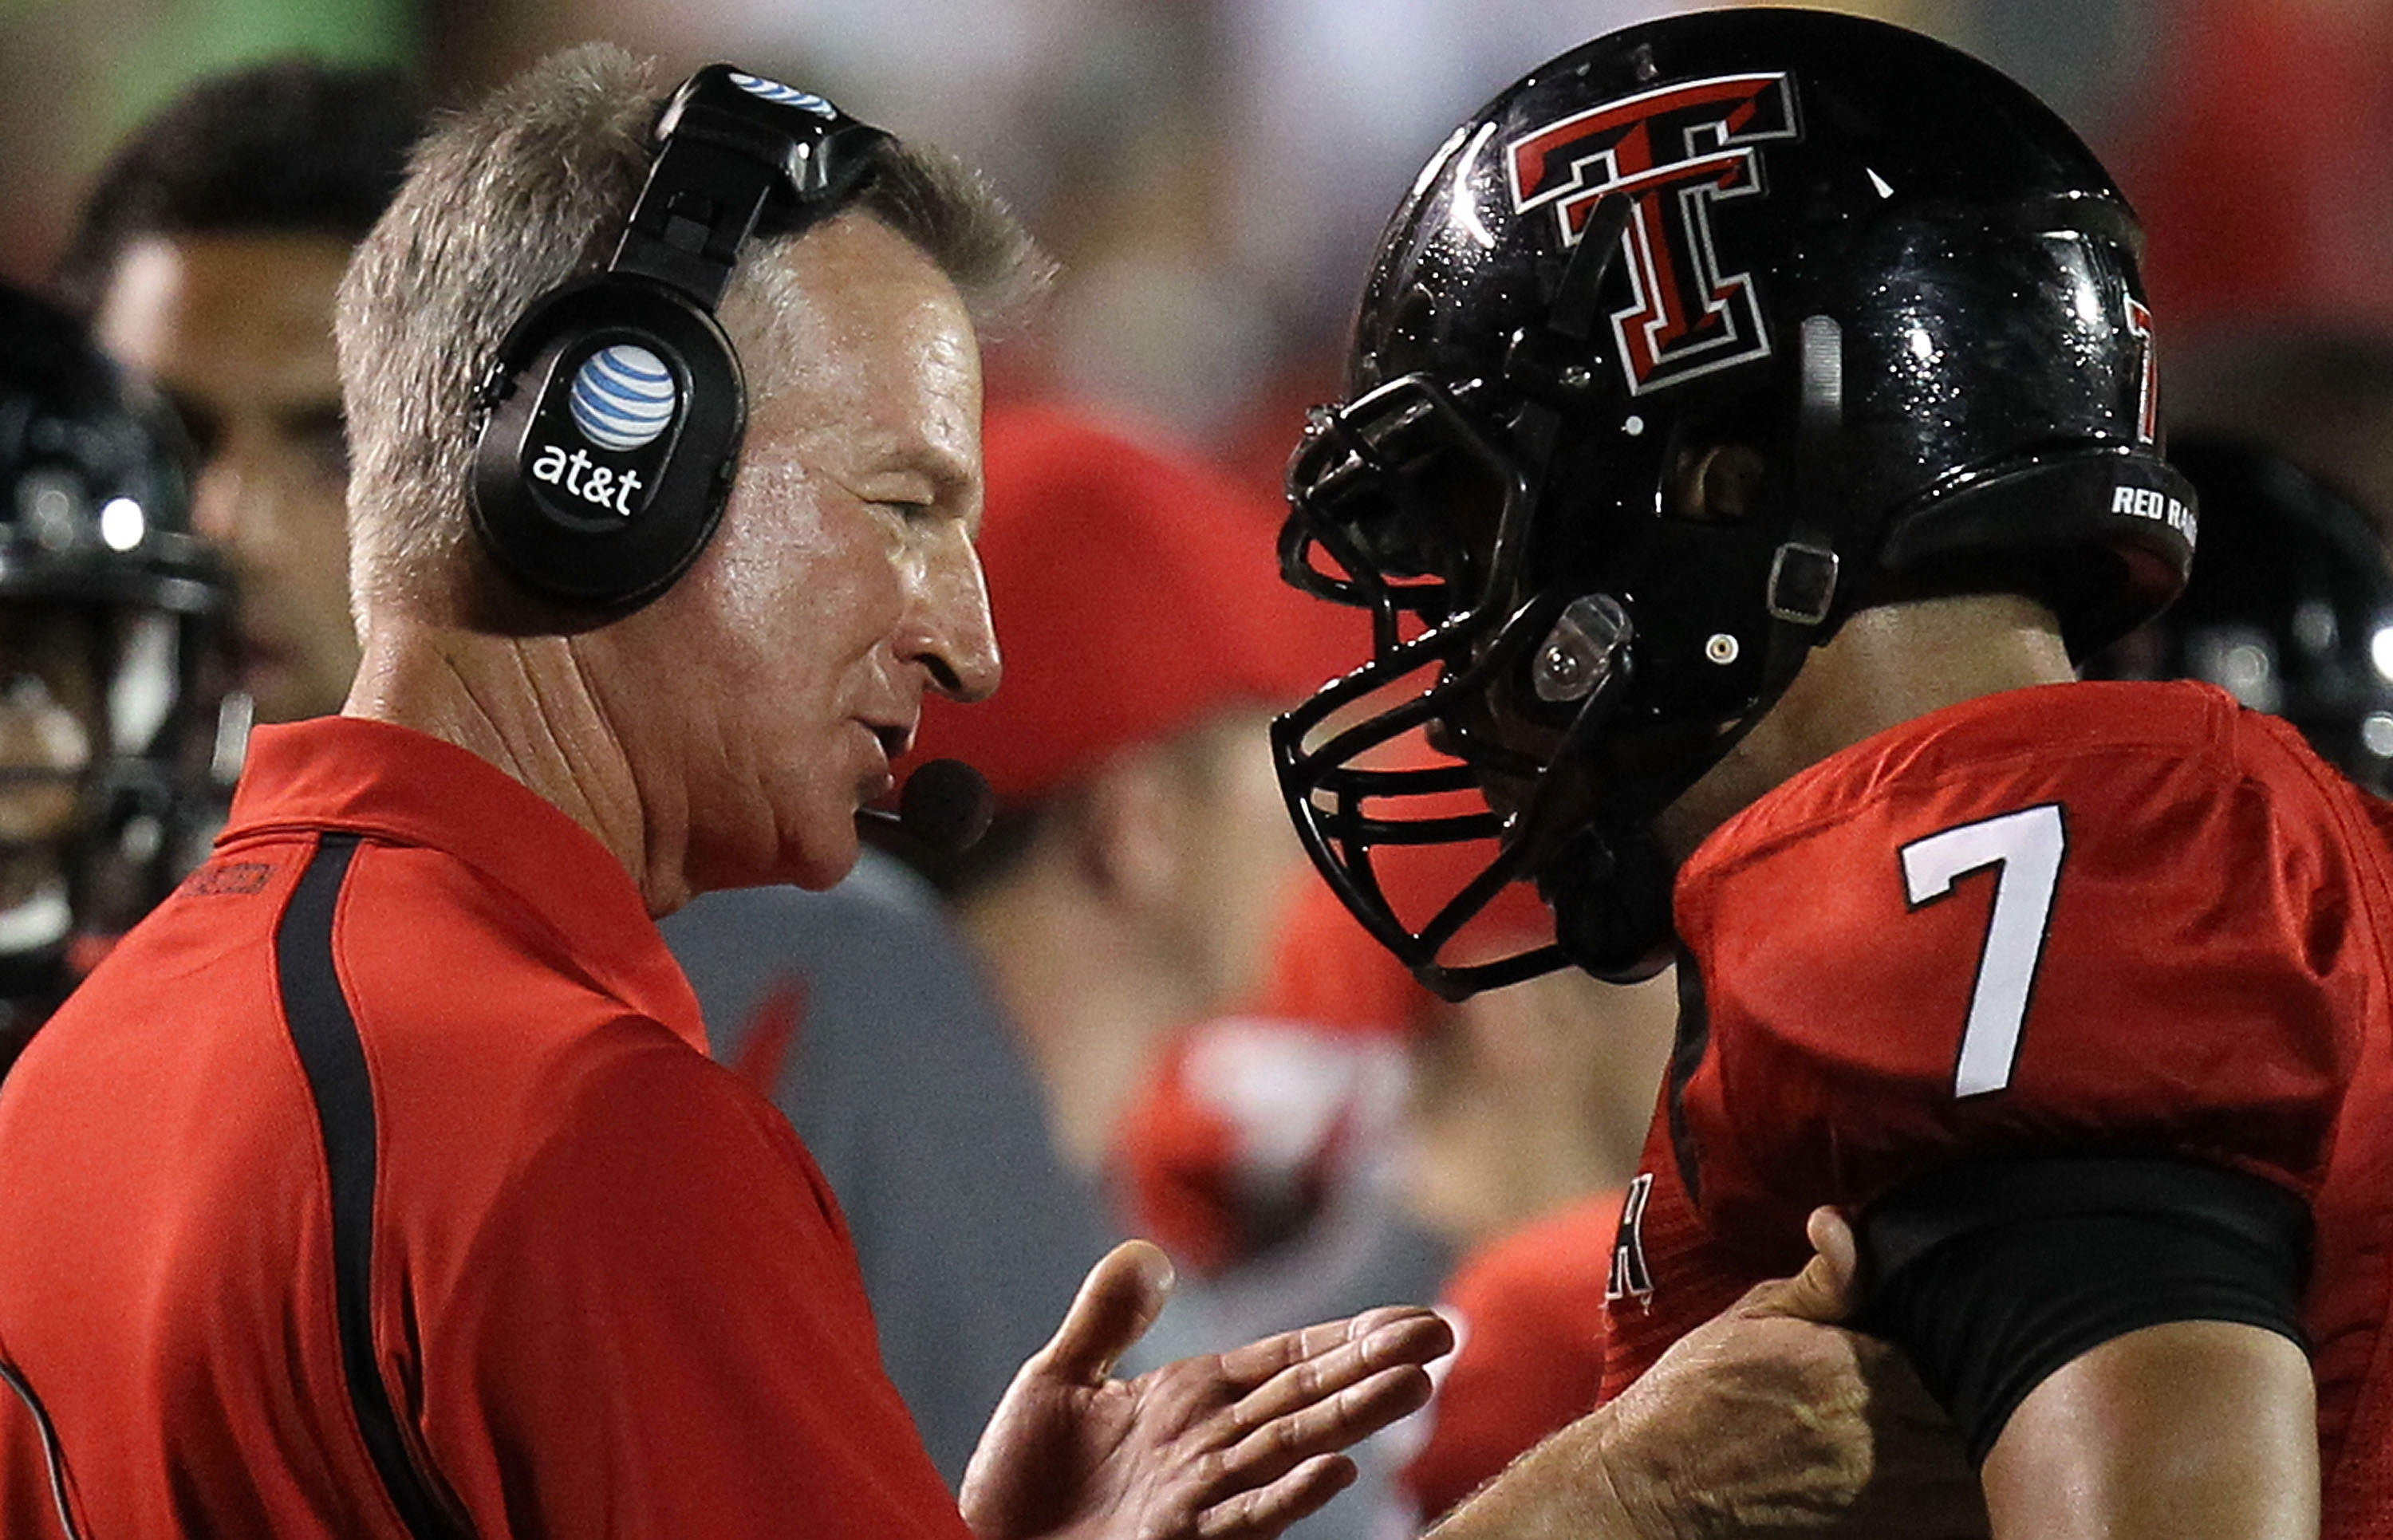 LUBBOCK, TX - SEPTEMBER 18:  Head coach Tommy Tuberville of the Texas Tech Red Raiders talks with Will Ford #7 during play against the Texas Longhorns at Jones AT&T Stadium on September 18, 2010 in Lubbock, Texas.  (Photo by Ronald Martinez/Getty Images)